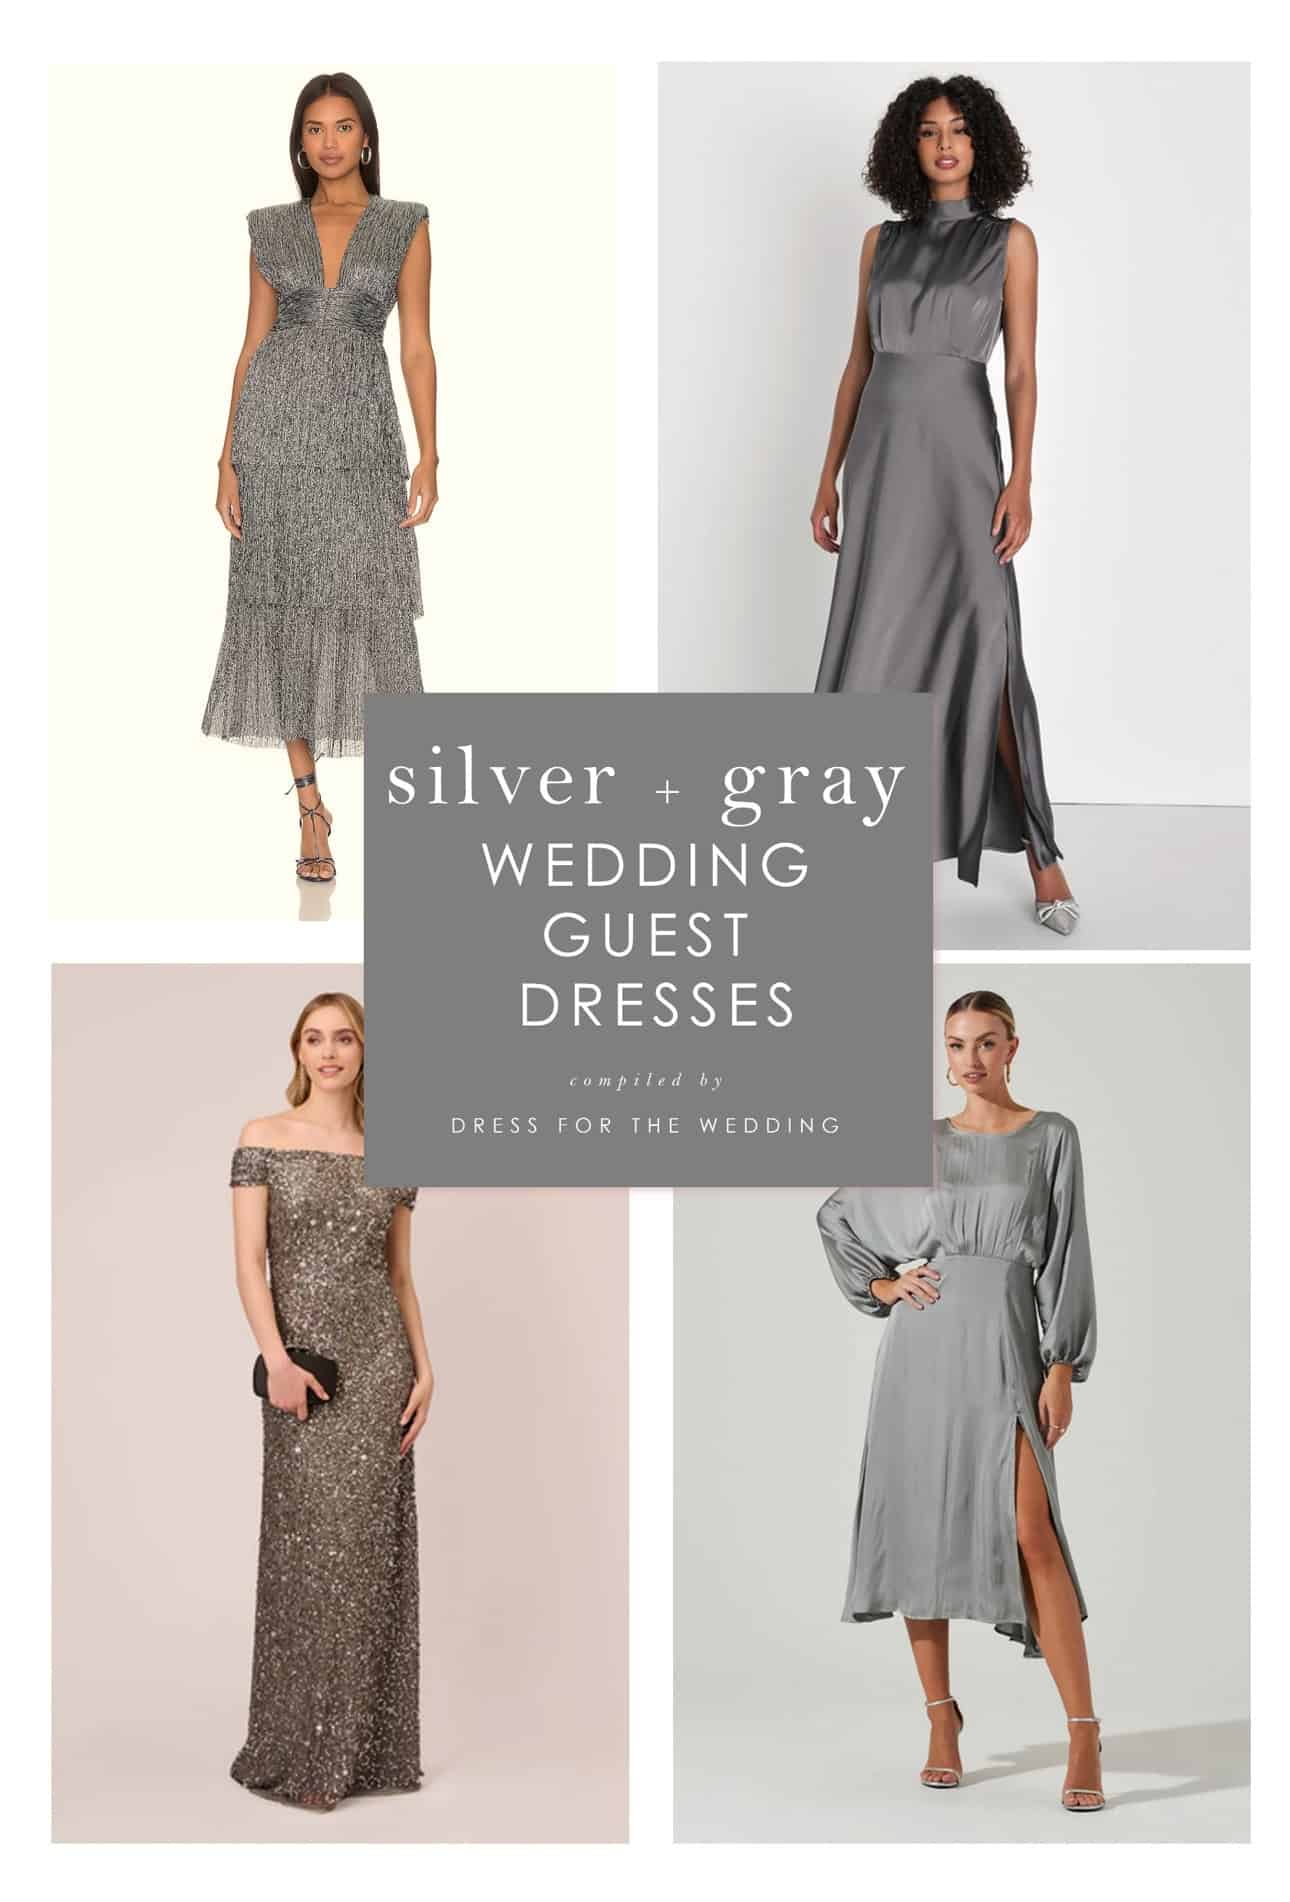 Silver Clutch with Silver Dress Outfits (19 ideas & outfits)